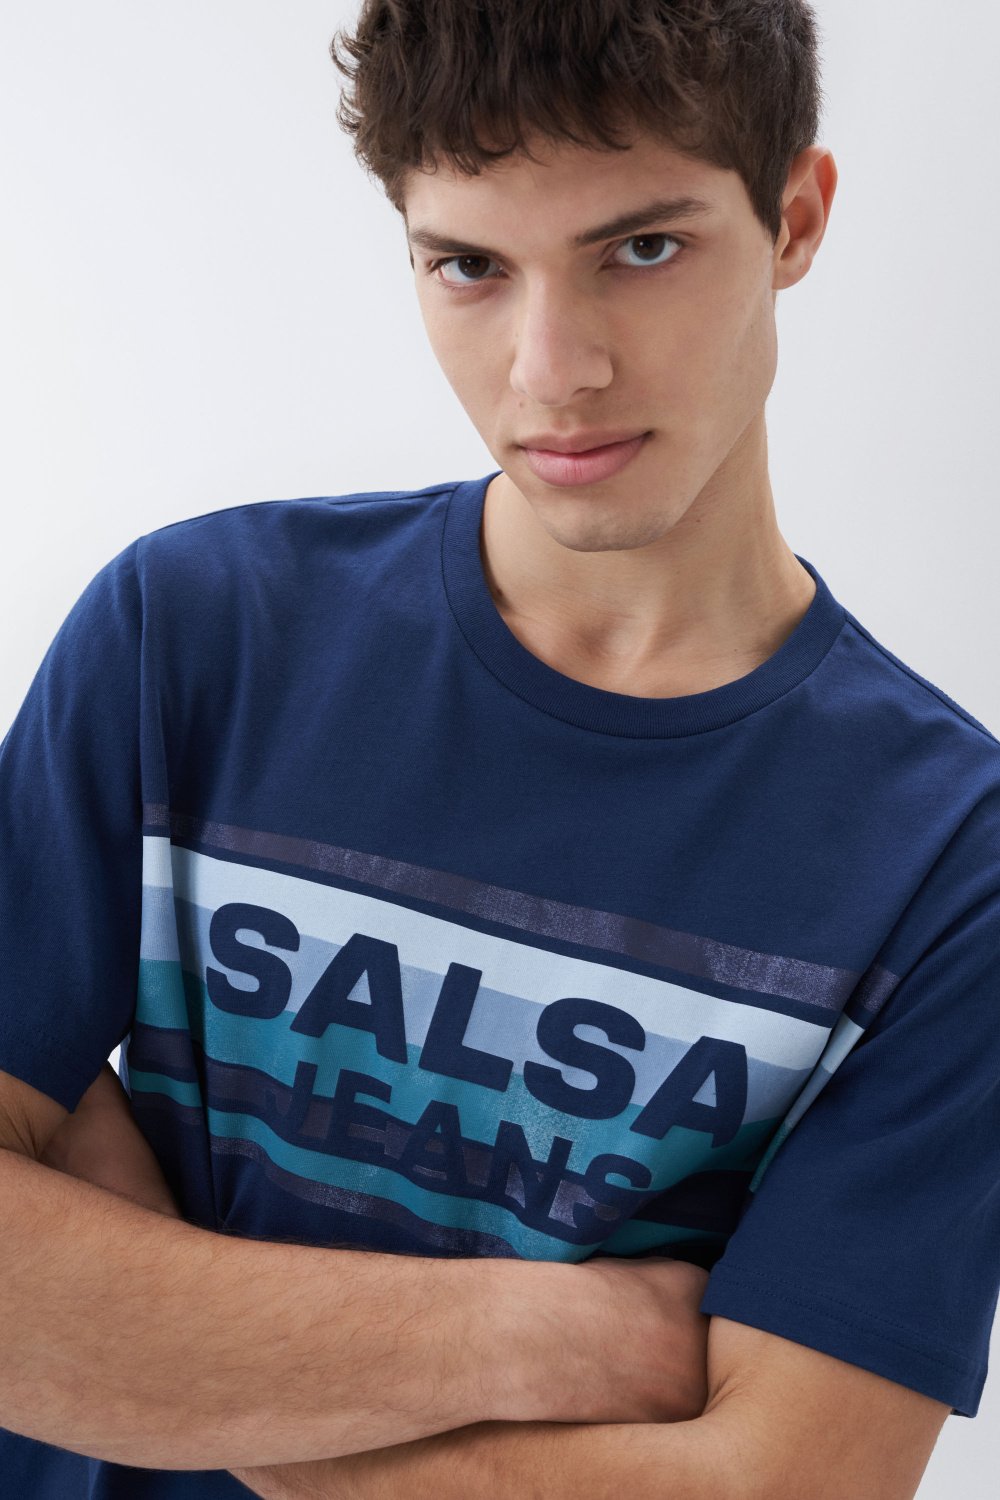 T-shirt with Salsa name and stripes - Salsa